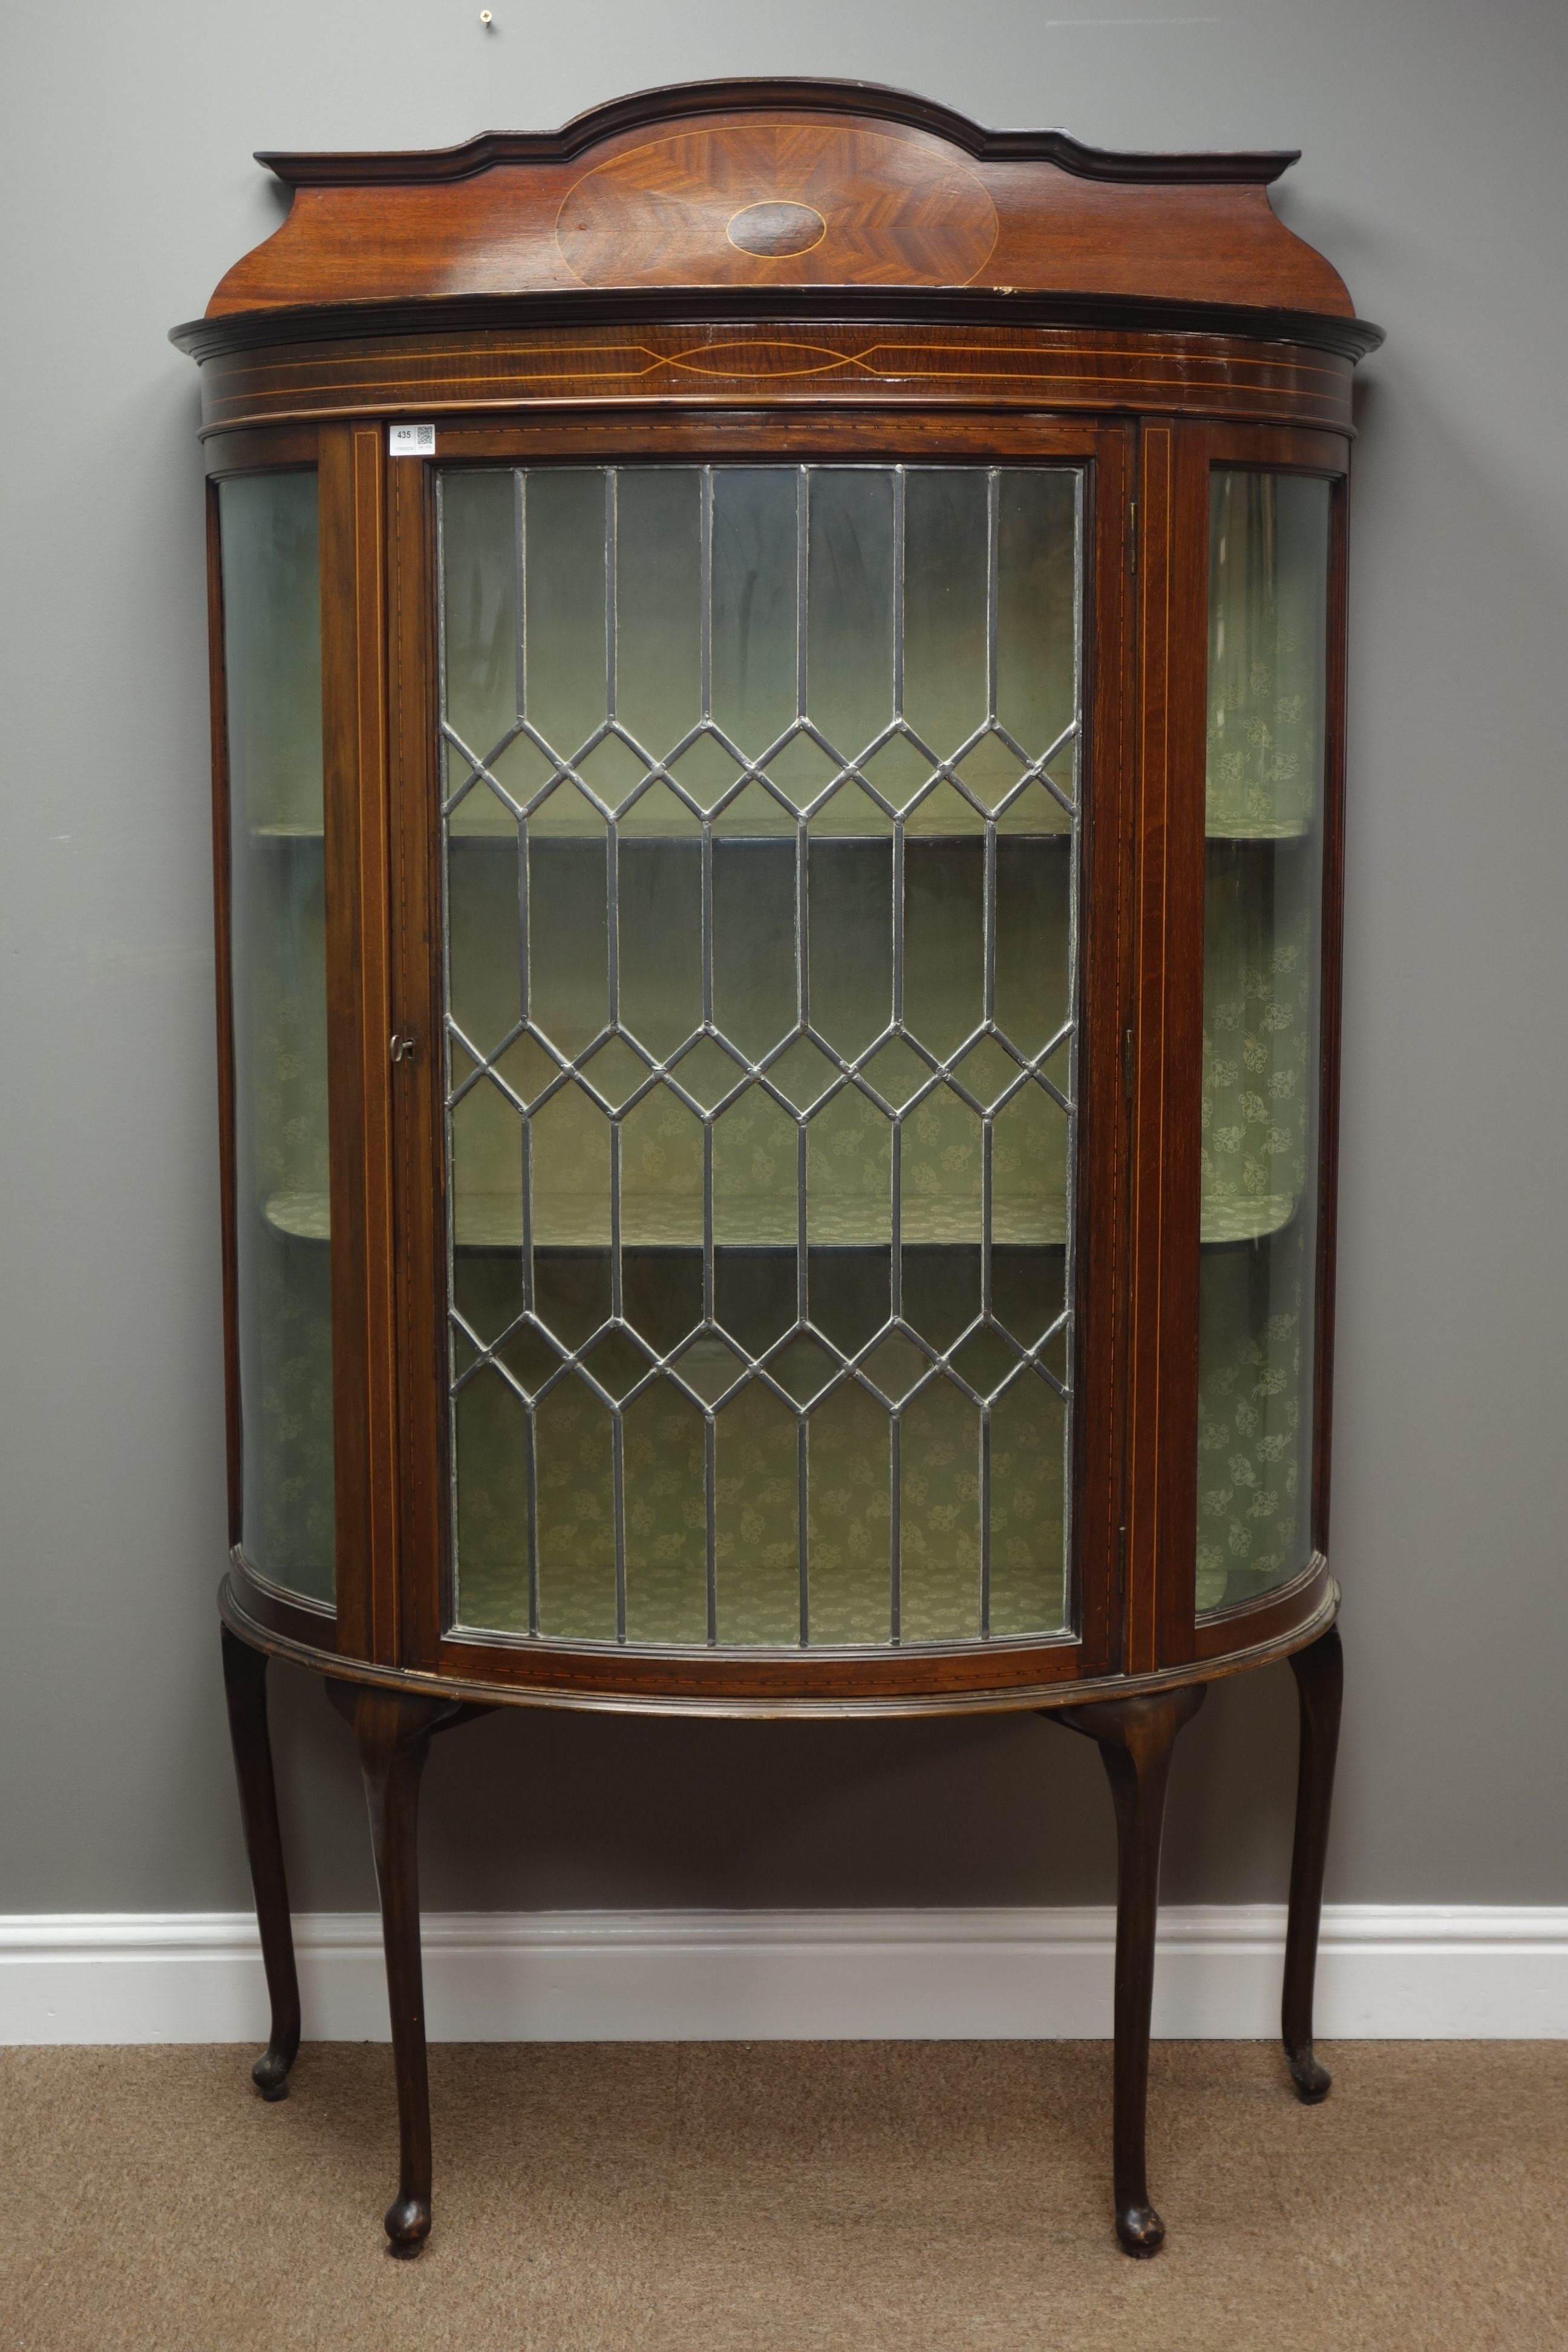 Edwardian inlaid mahogany display cabinet, demi-lune front, raised back with segmented inlay,